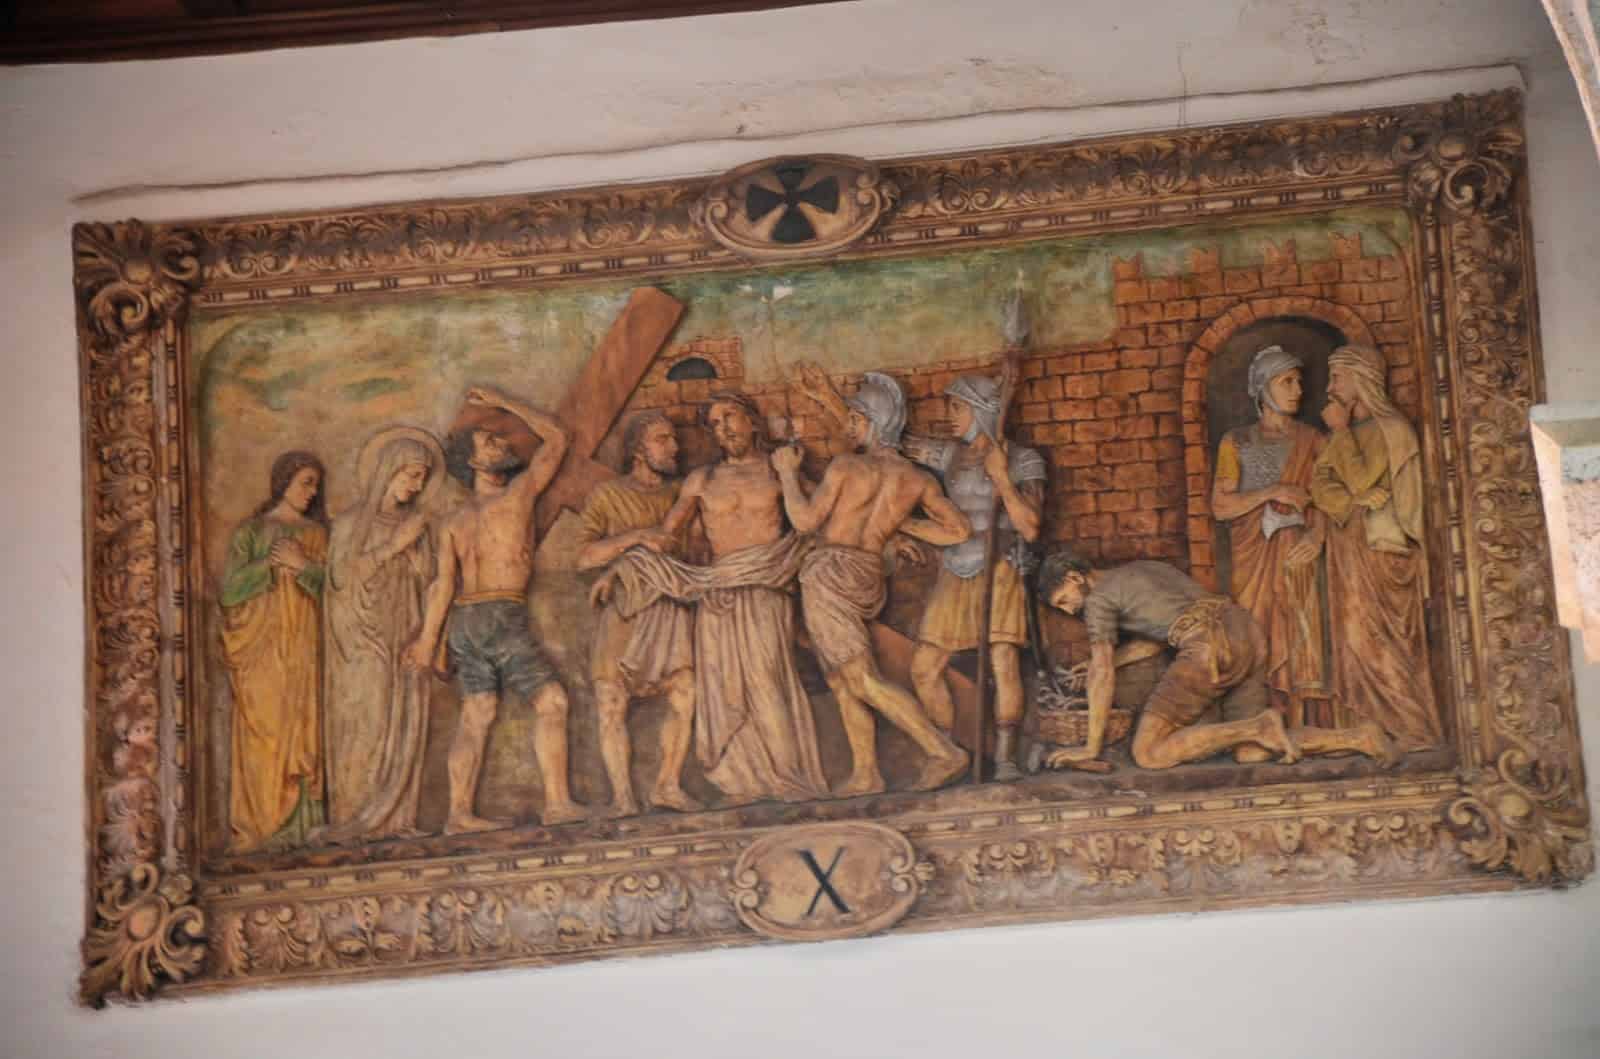 Wooden carving of the 10th Station of the Cross in the Cathedral of Cartagena